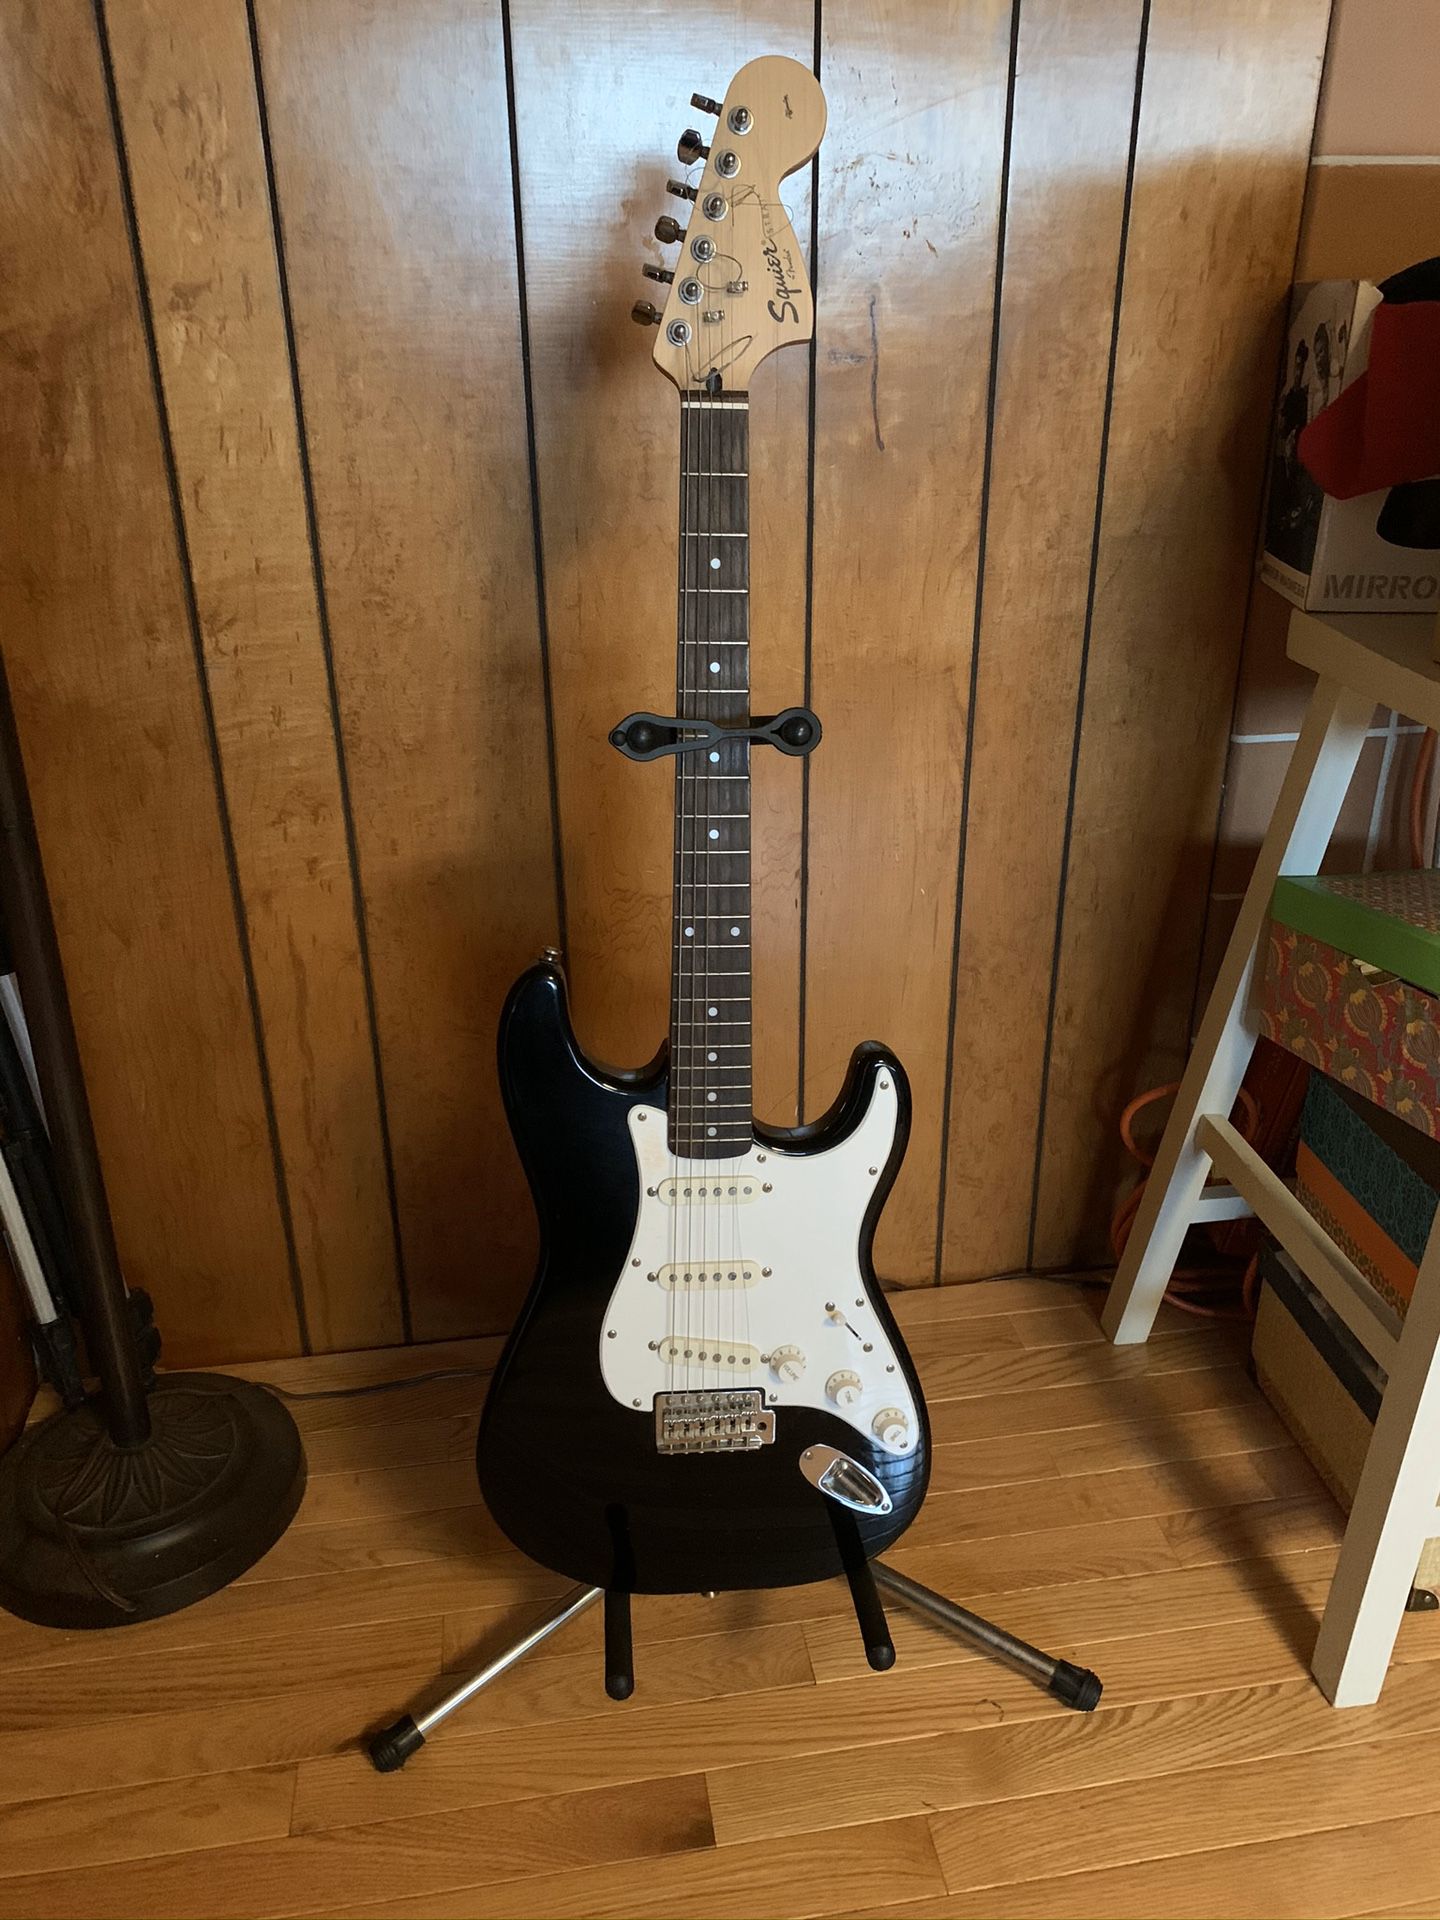 Squier Strat by Fender electric guitar